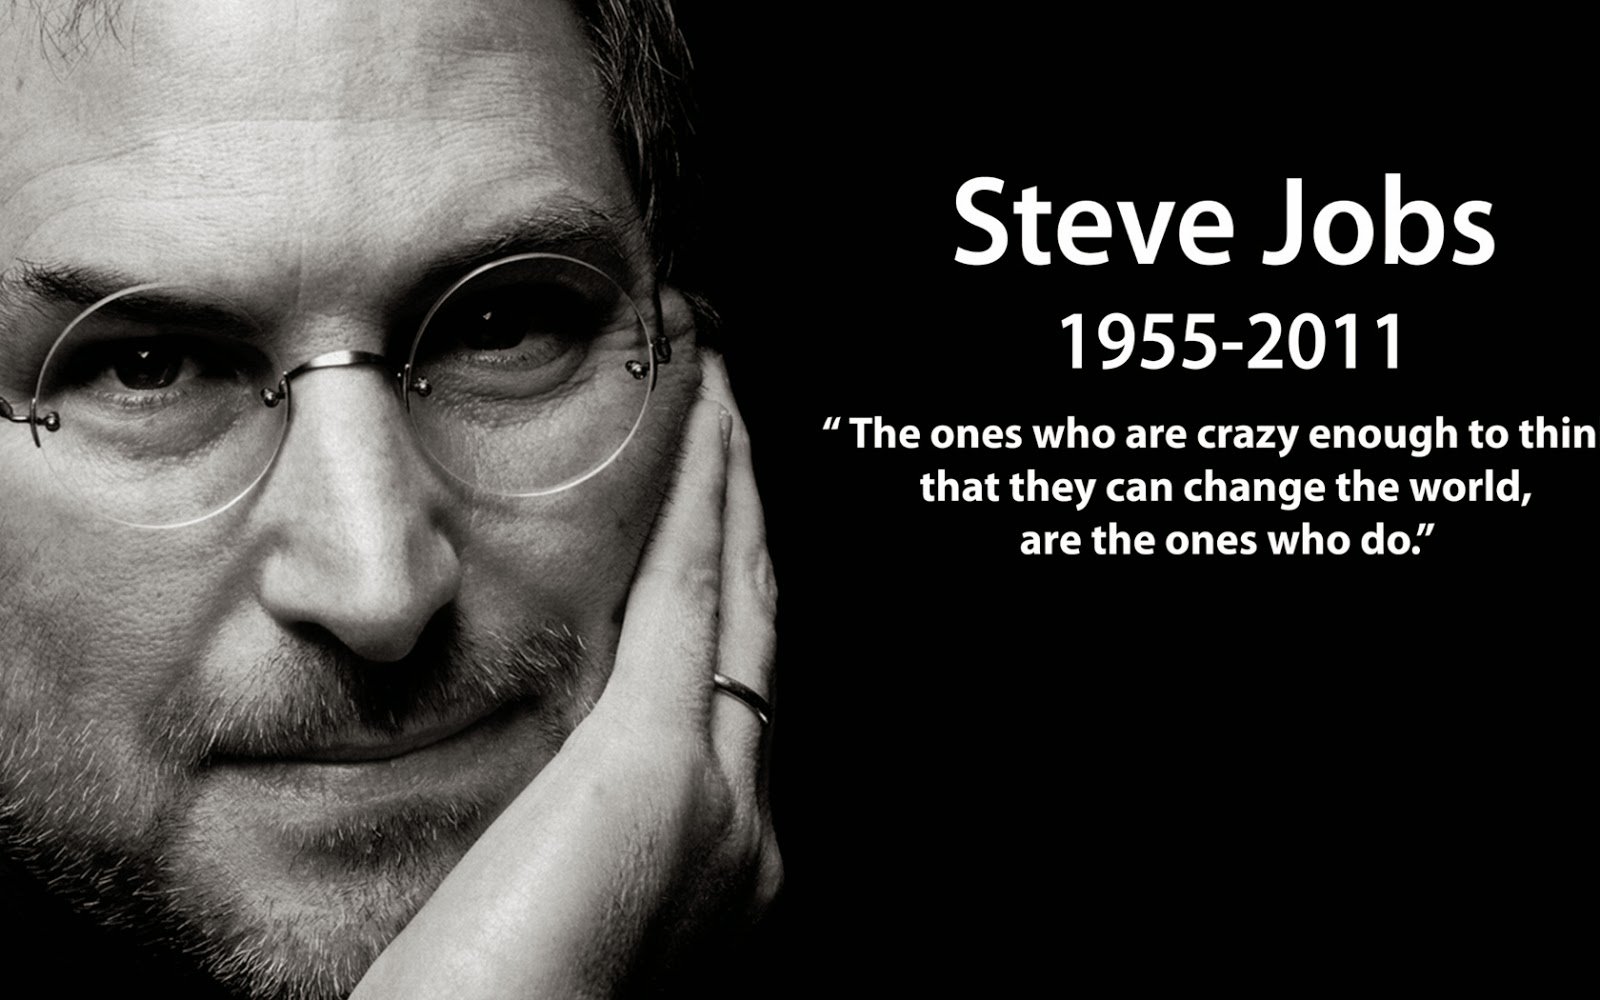 Happy Birthday Steve Jobs.
Thank you for changing the world! 